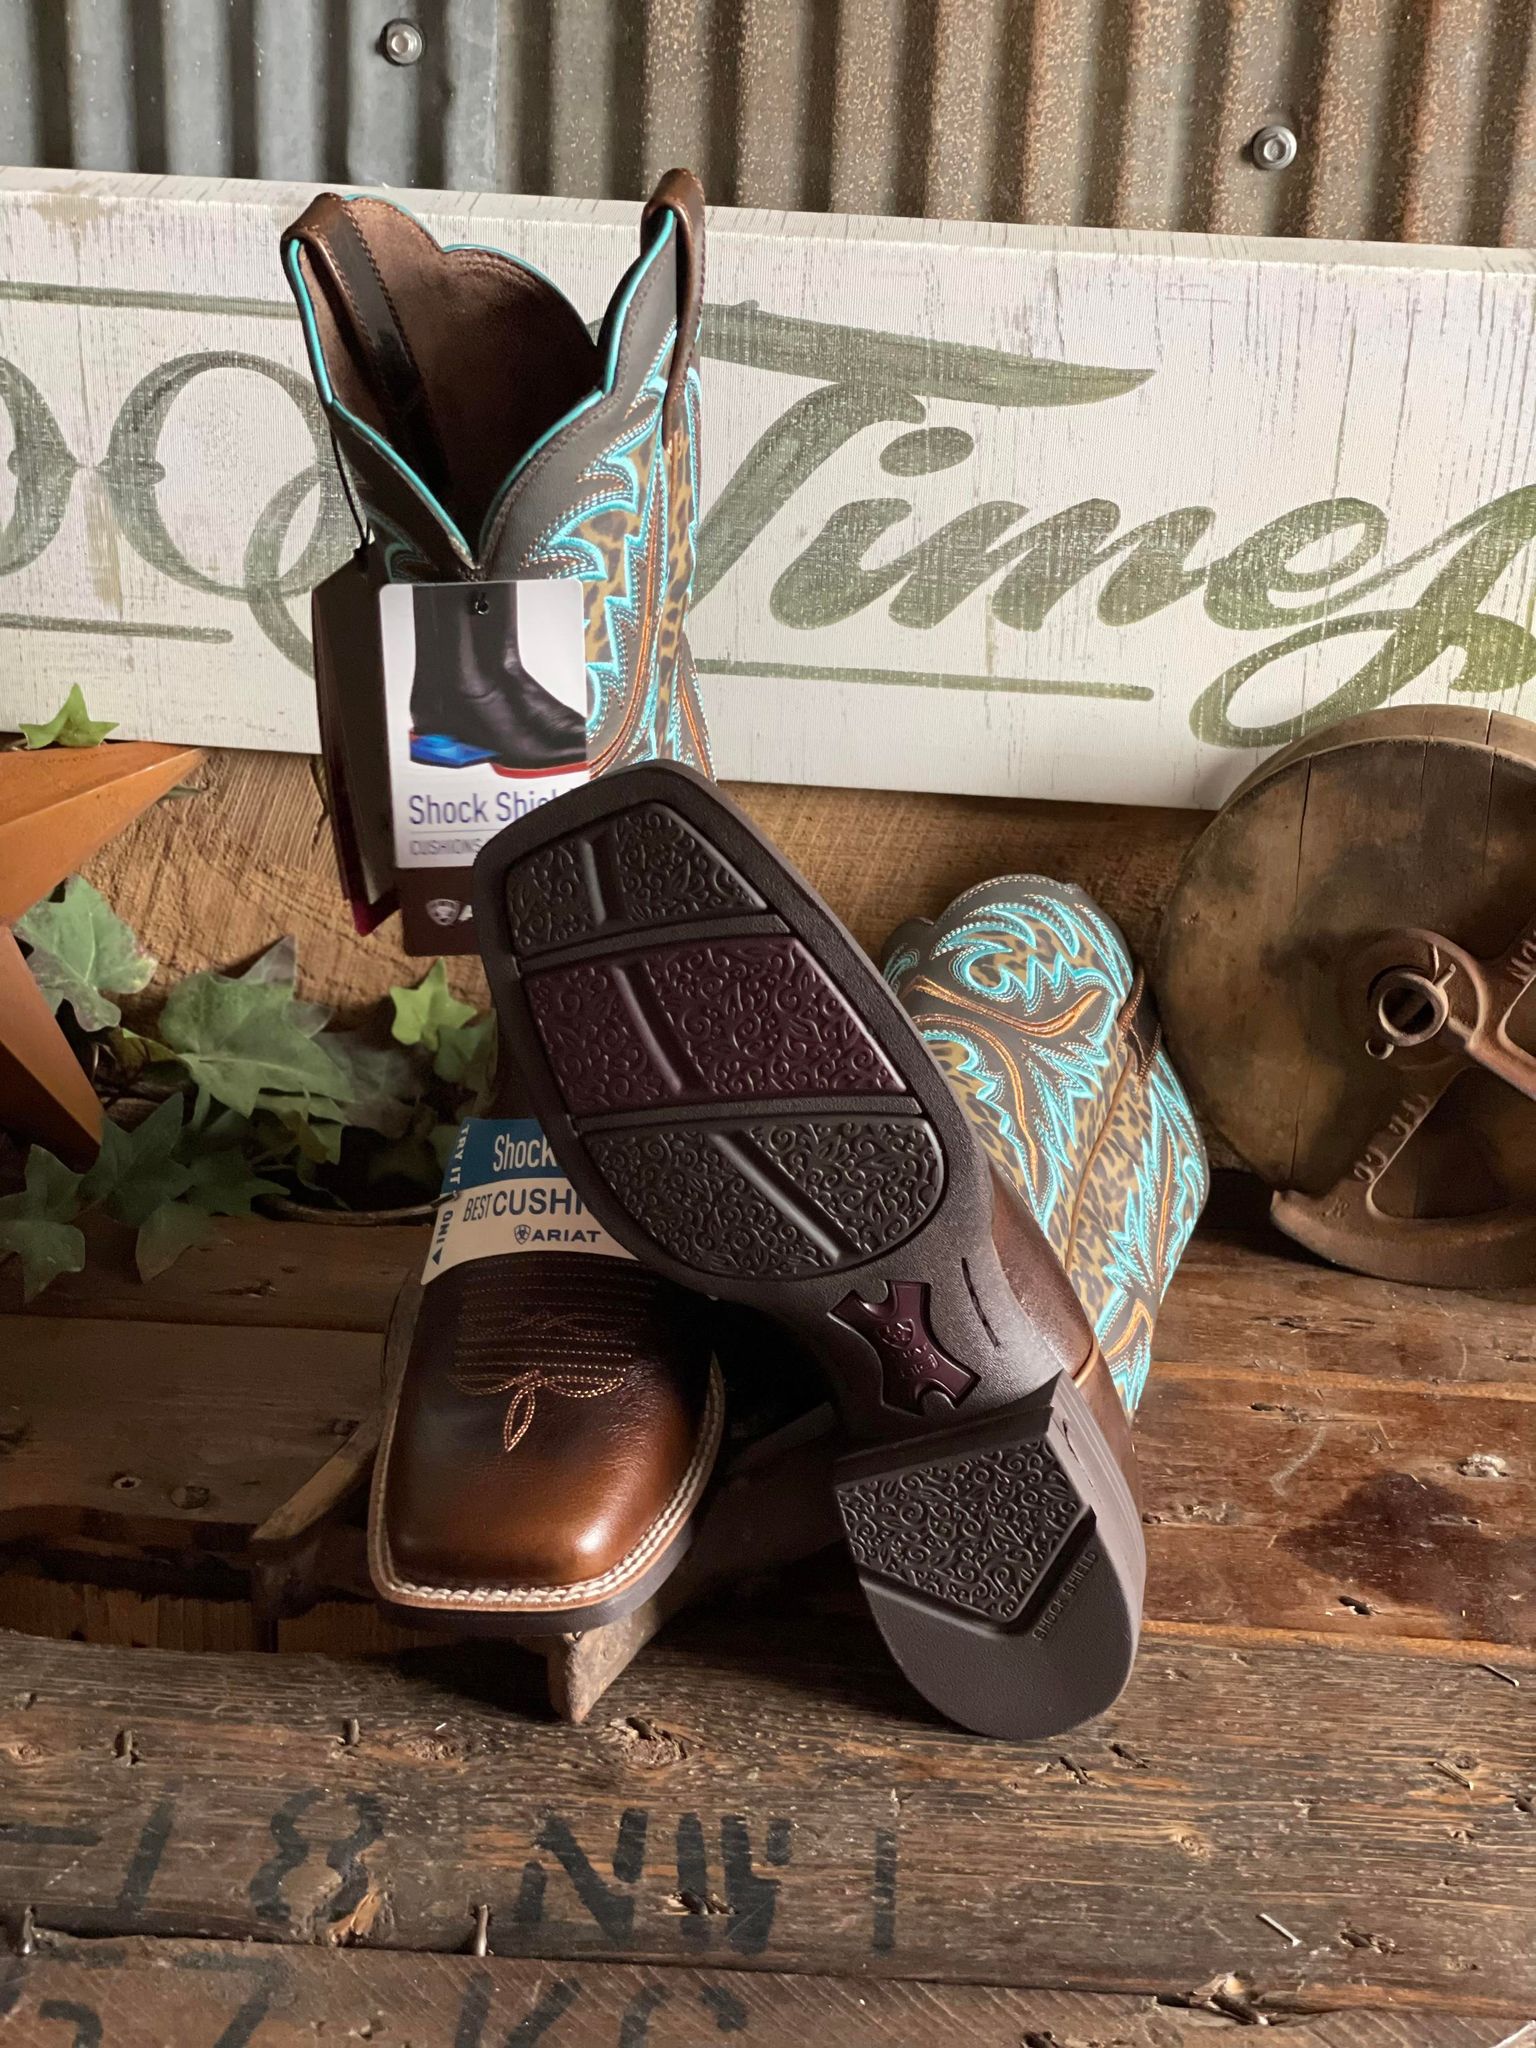 Ariat Women's Lonestar Square Toe Boot-Women's Boots-Ariat-Lucky J Boots & More, Women's, Men's, & Kids Western Store Located in Carthage, MO